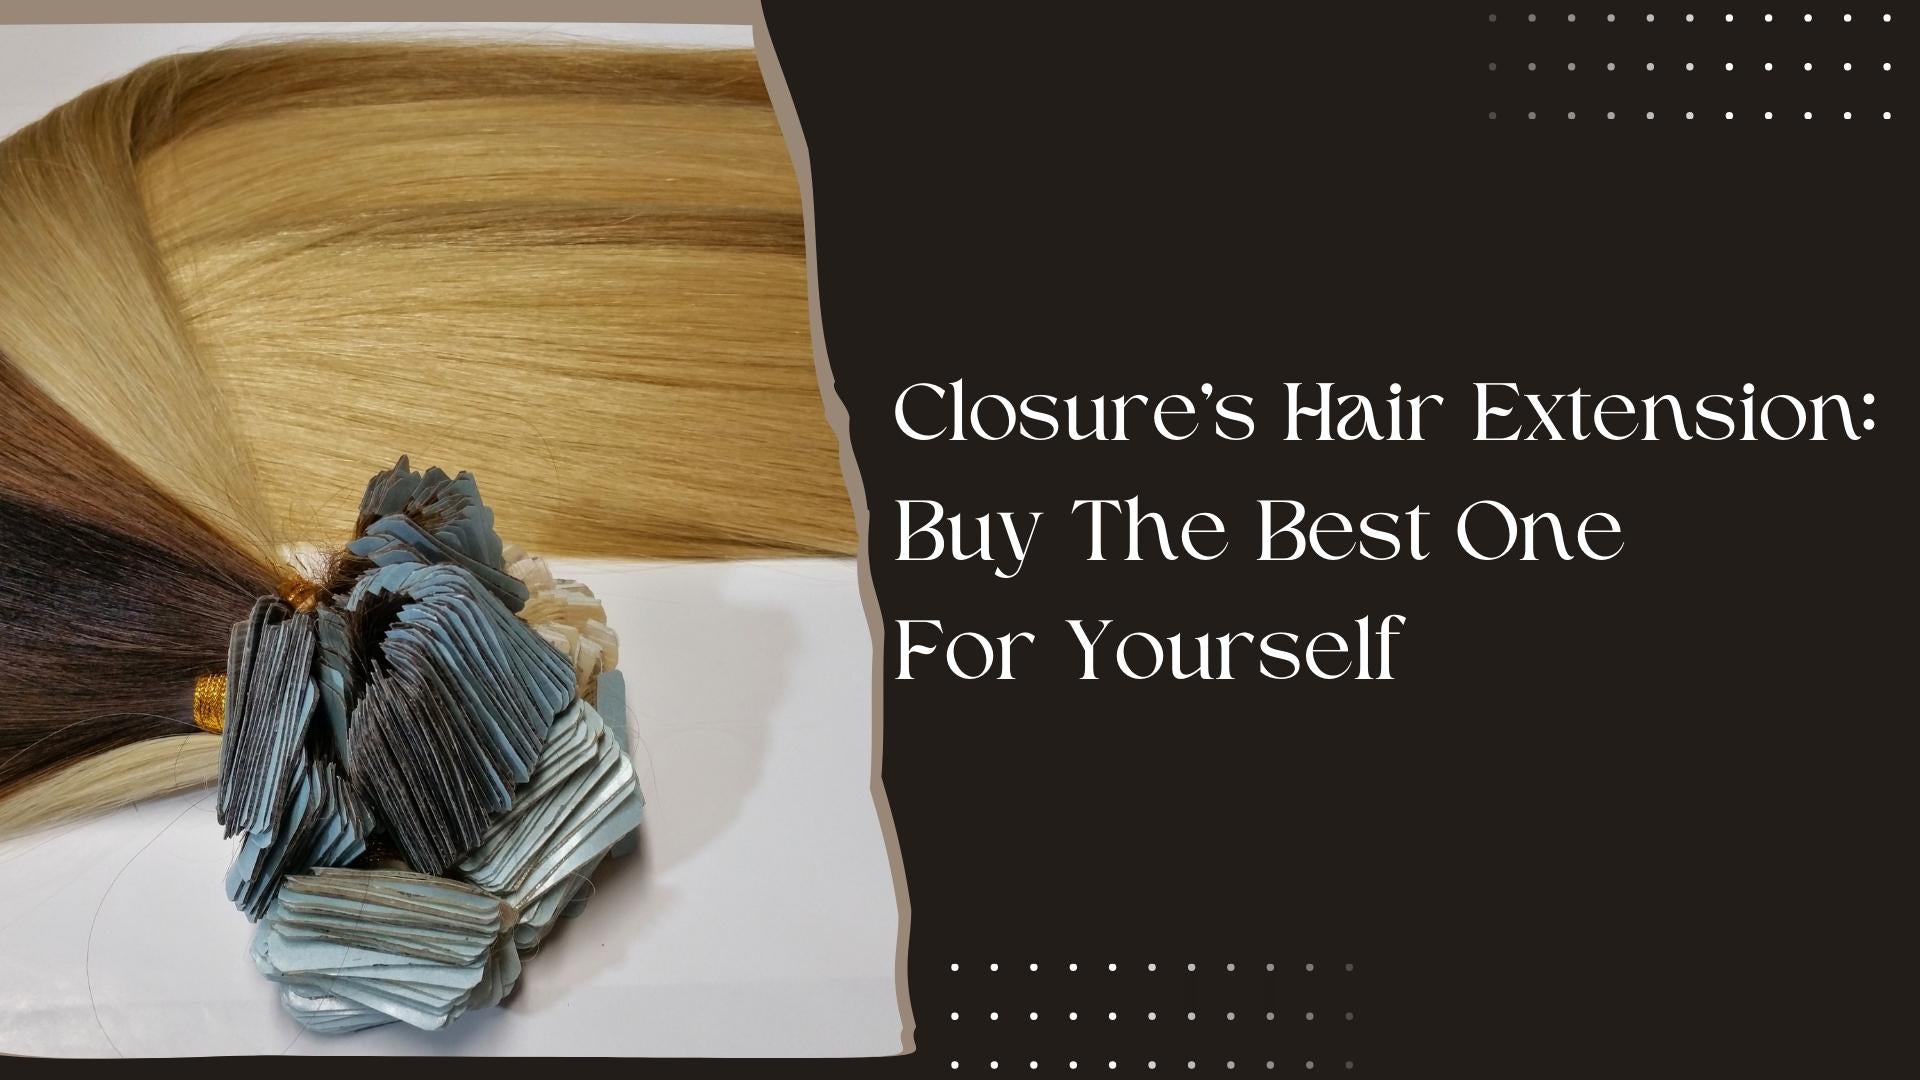 Closure’s Hair Extension: Buy The Best One For Yourself